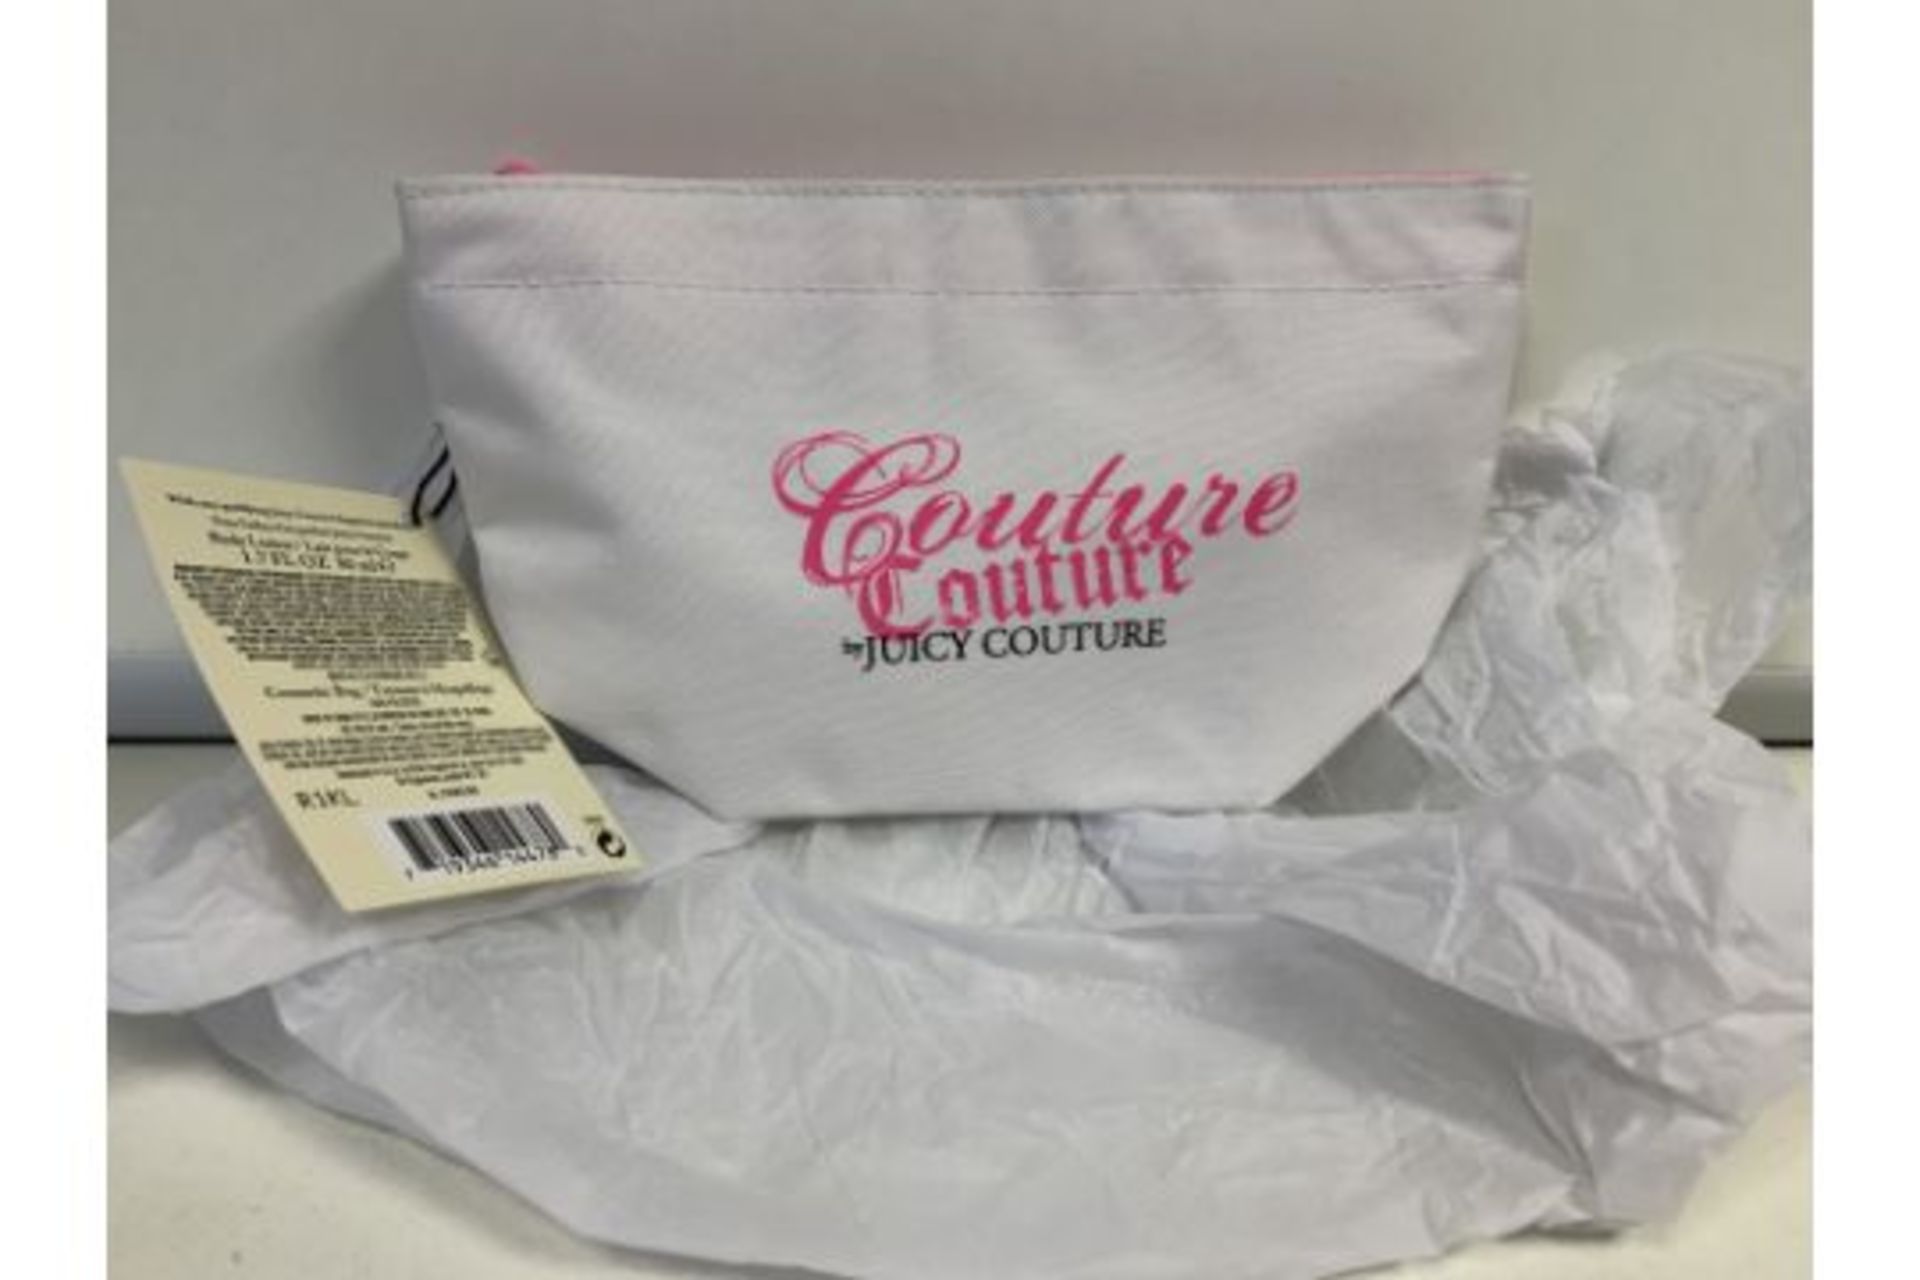 BRAND NEW JUICY COUTURE COSMETIC BAG AND 50ML BODY LOTION